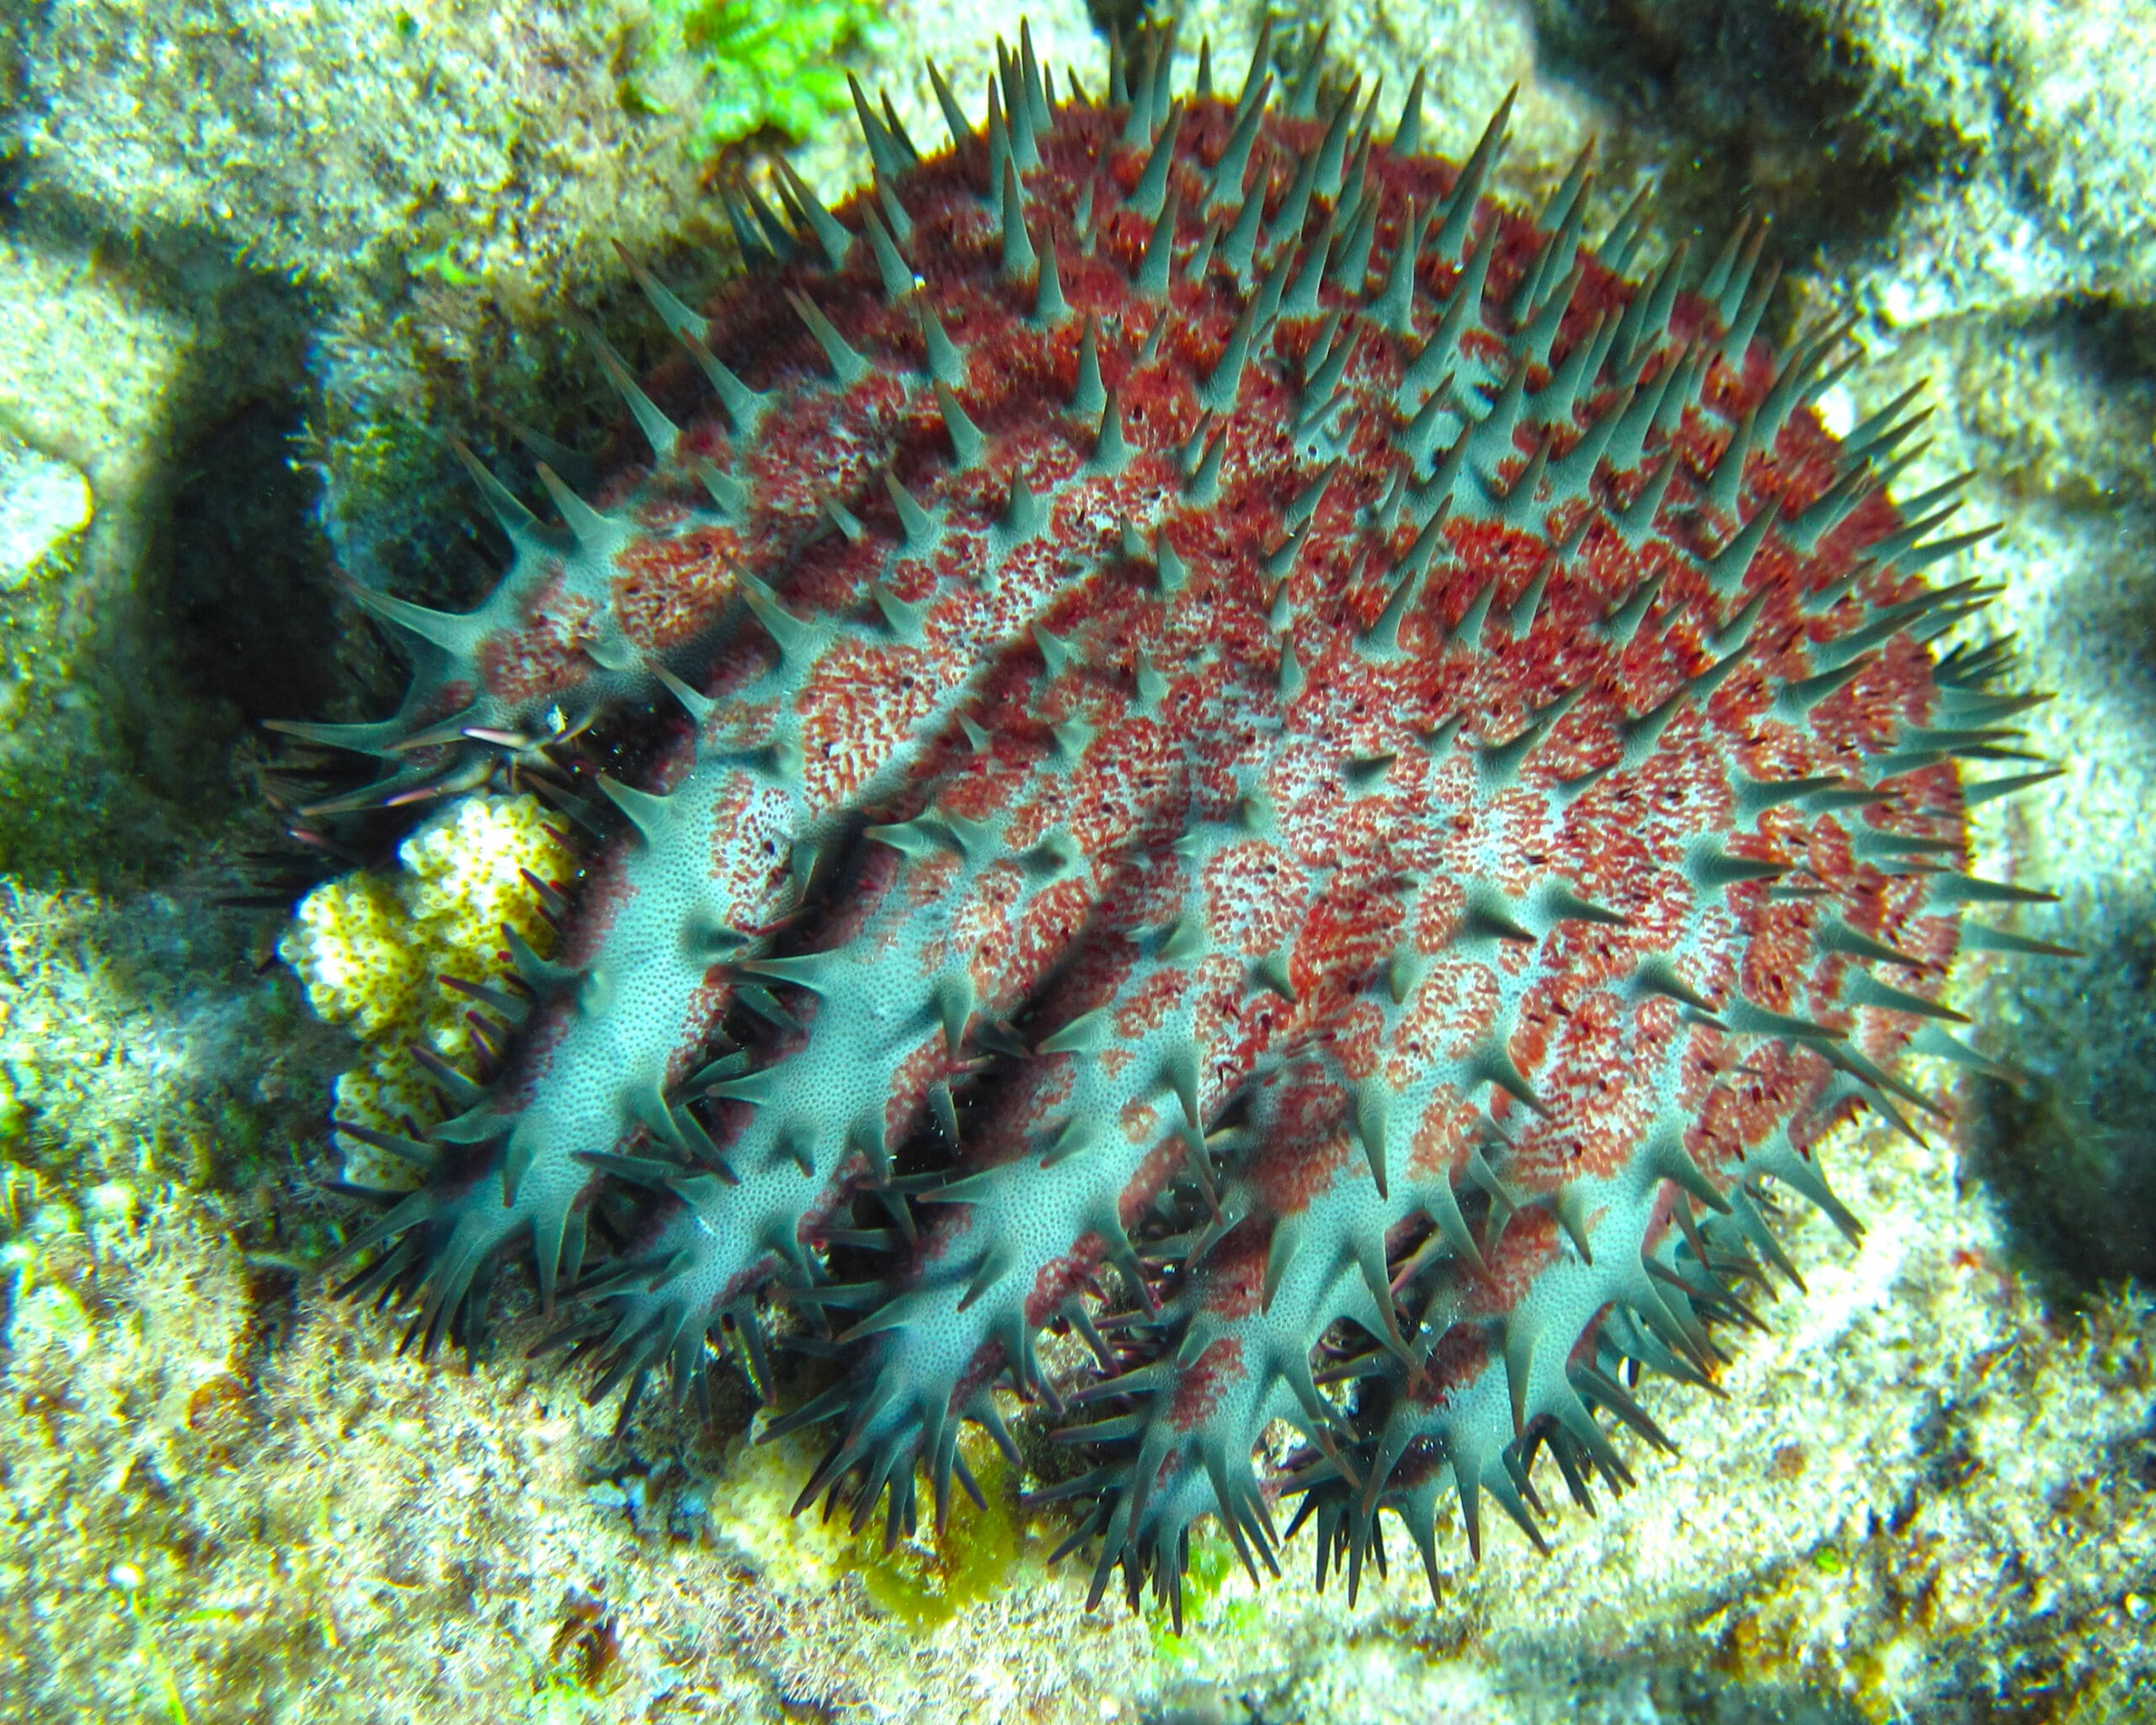 In Hawaii, healthy reef systems can support small populations of Crown-of-Thorns Starfish (COTS) for many years with only a small reduction in coral cover. But when a COTS outbreak occurs, competition forces them to eat all coral species, killing most of the living coral in the area. It can take decades for the reef to recover.